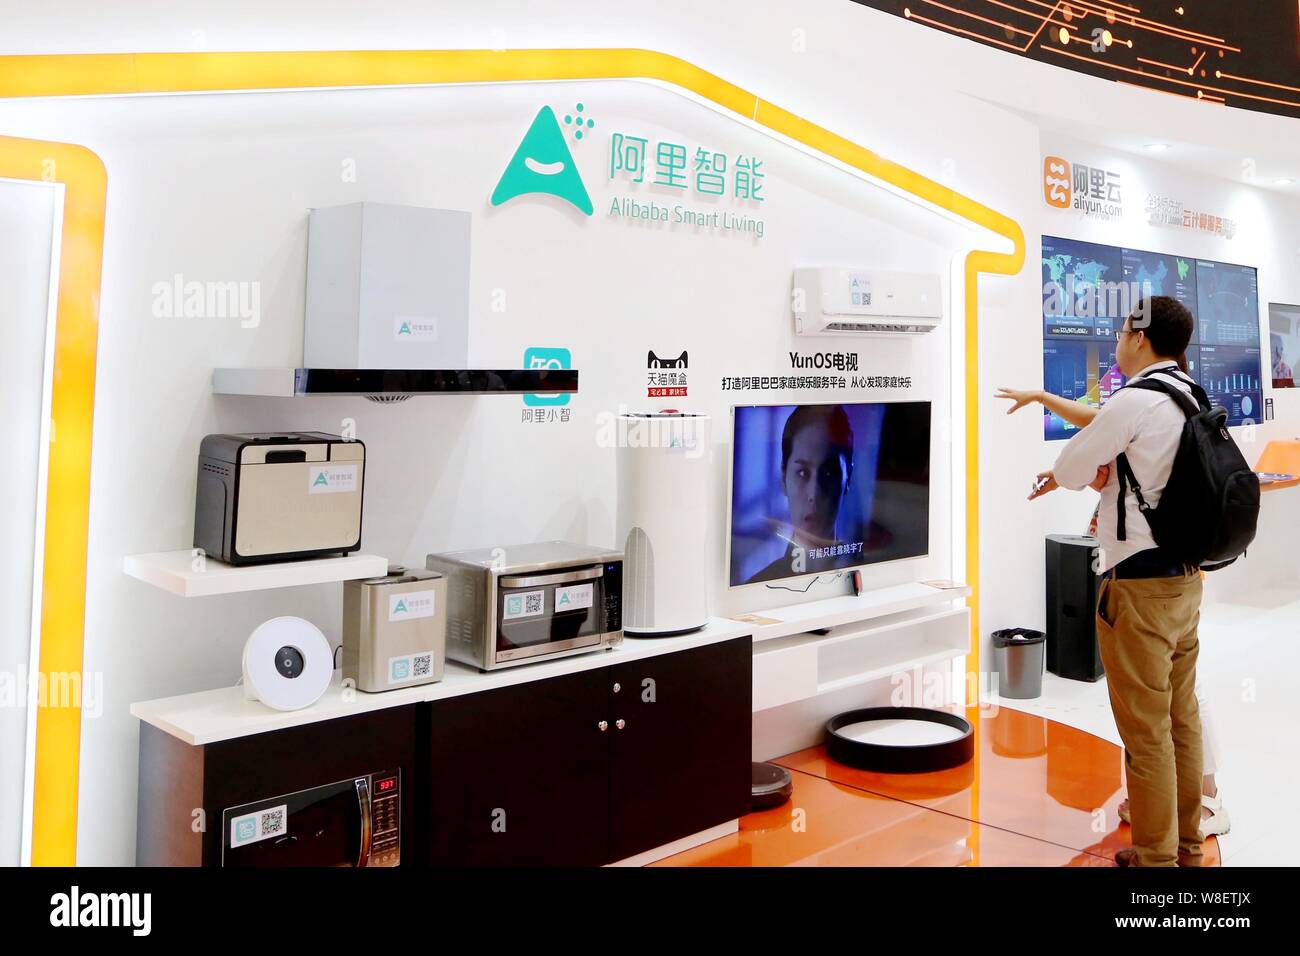 A visitor inquires an employee about Alibaba Smart Living during the GSMA Mobile World Congress 2015 in Shanghai, China, 15 July 2015. Stock Photo